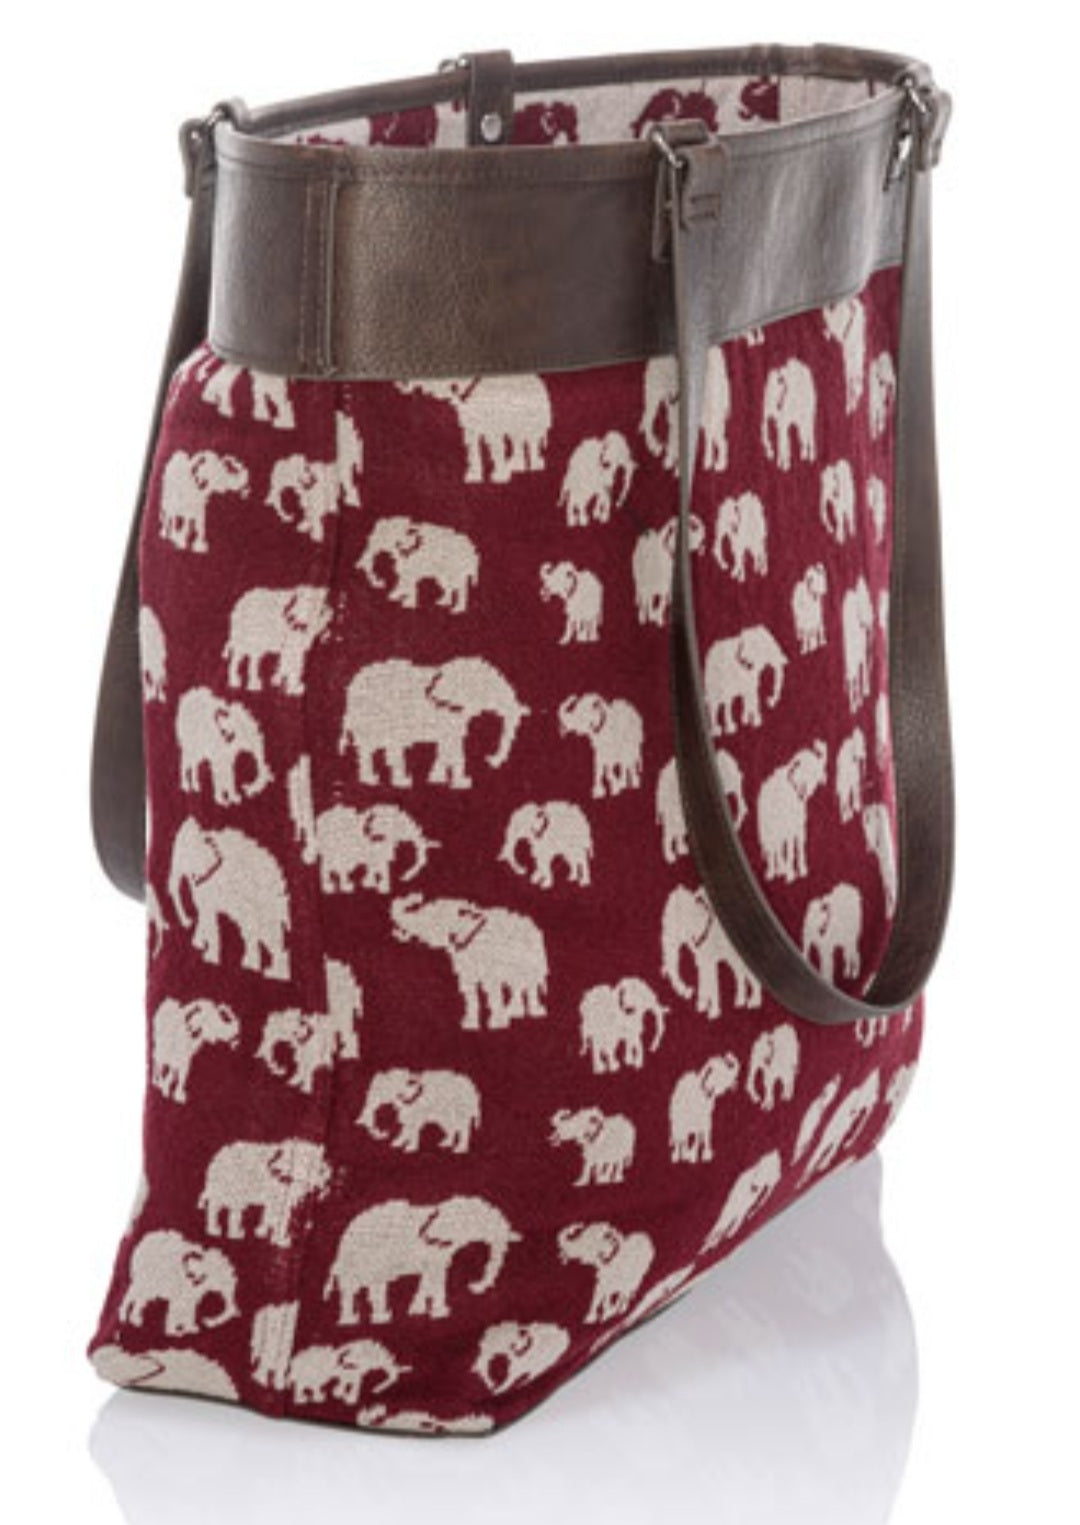 Thirty-One Elephant Tote Bags for Women